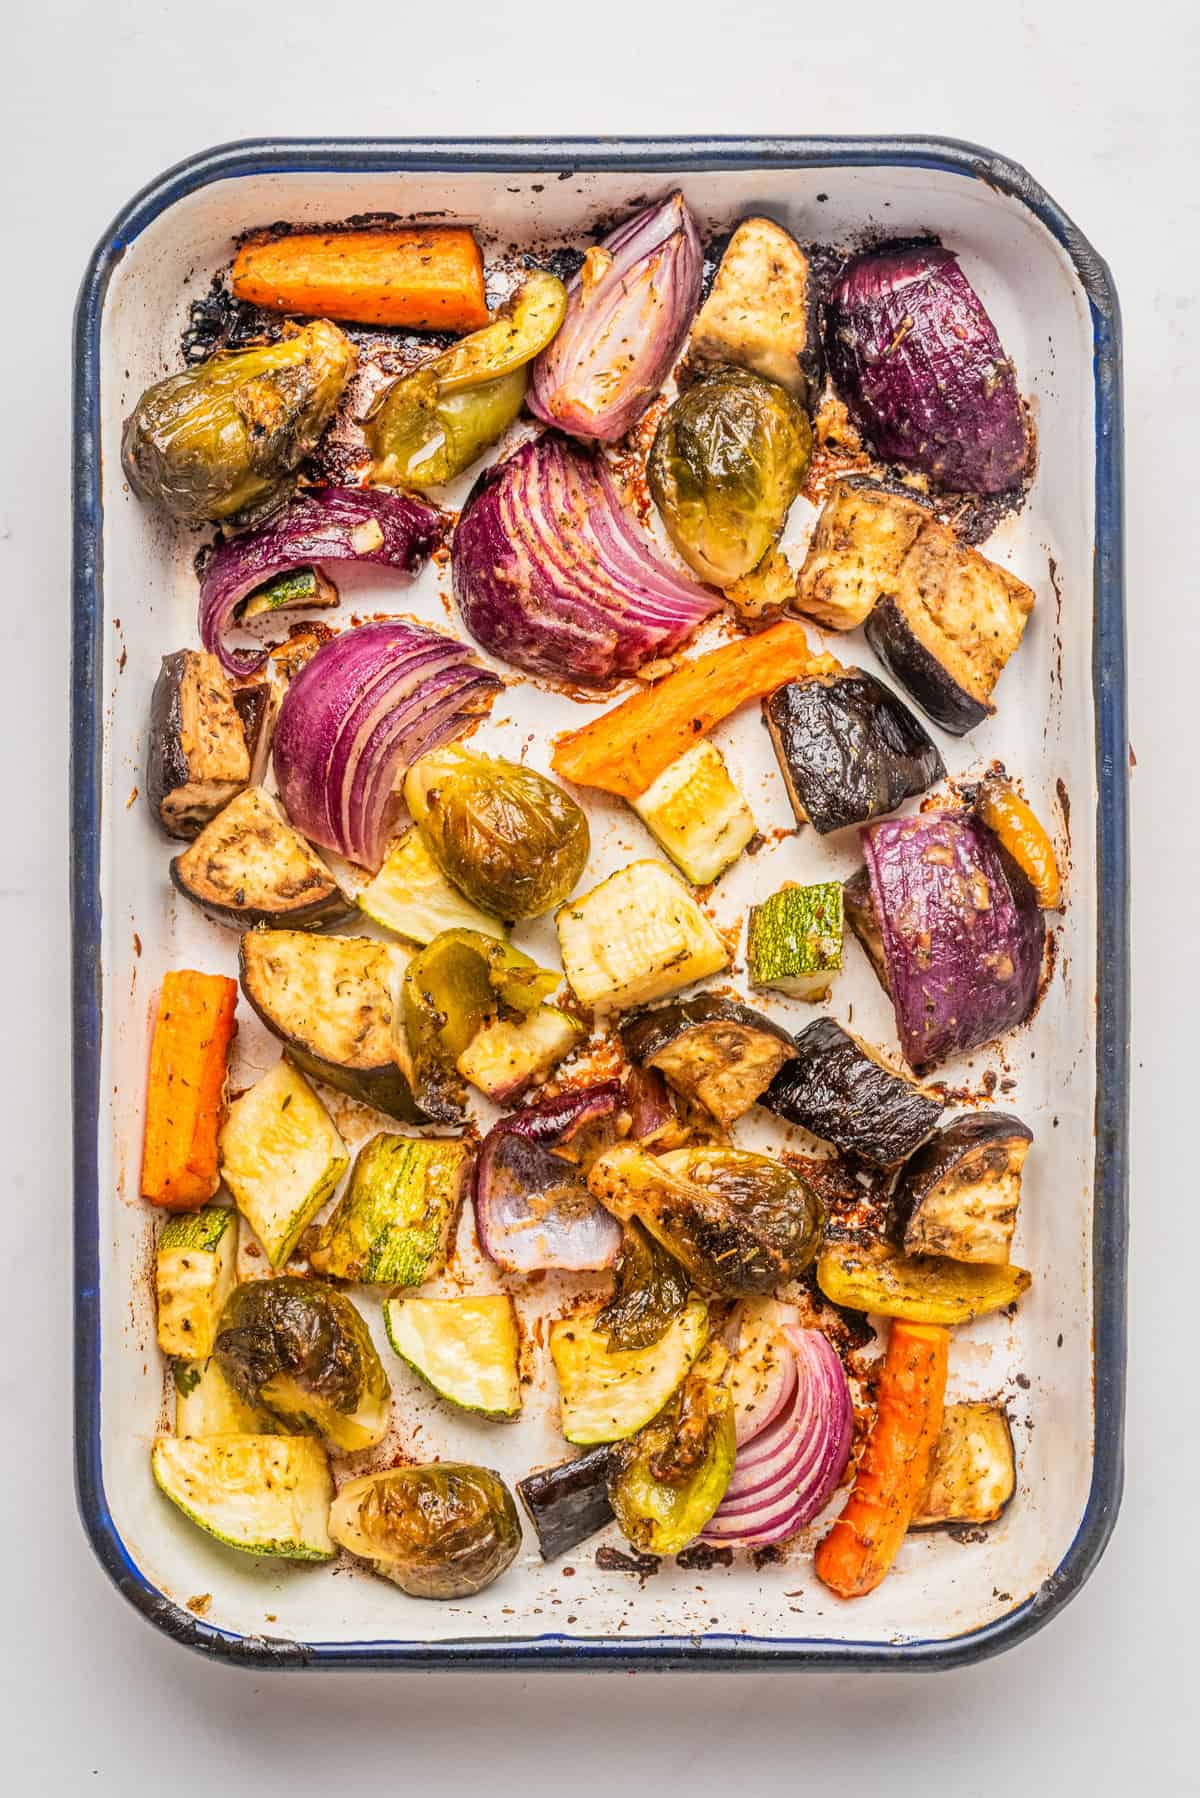 An overhead image of roasted vegetable salad on a baking dish.